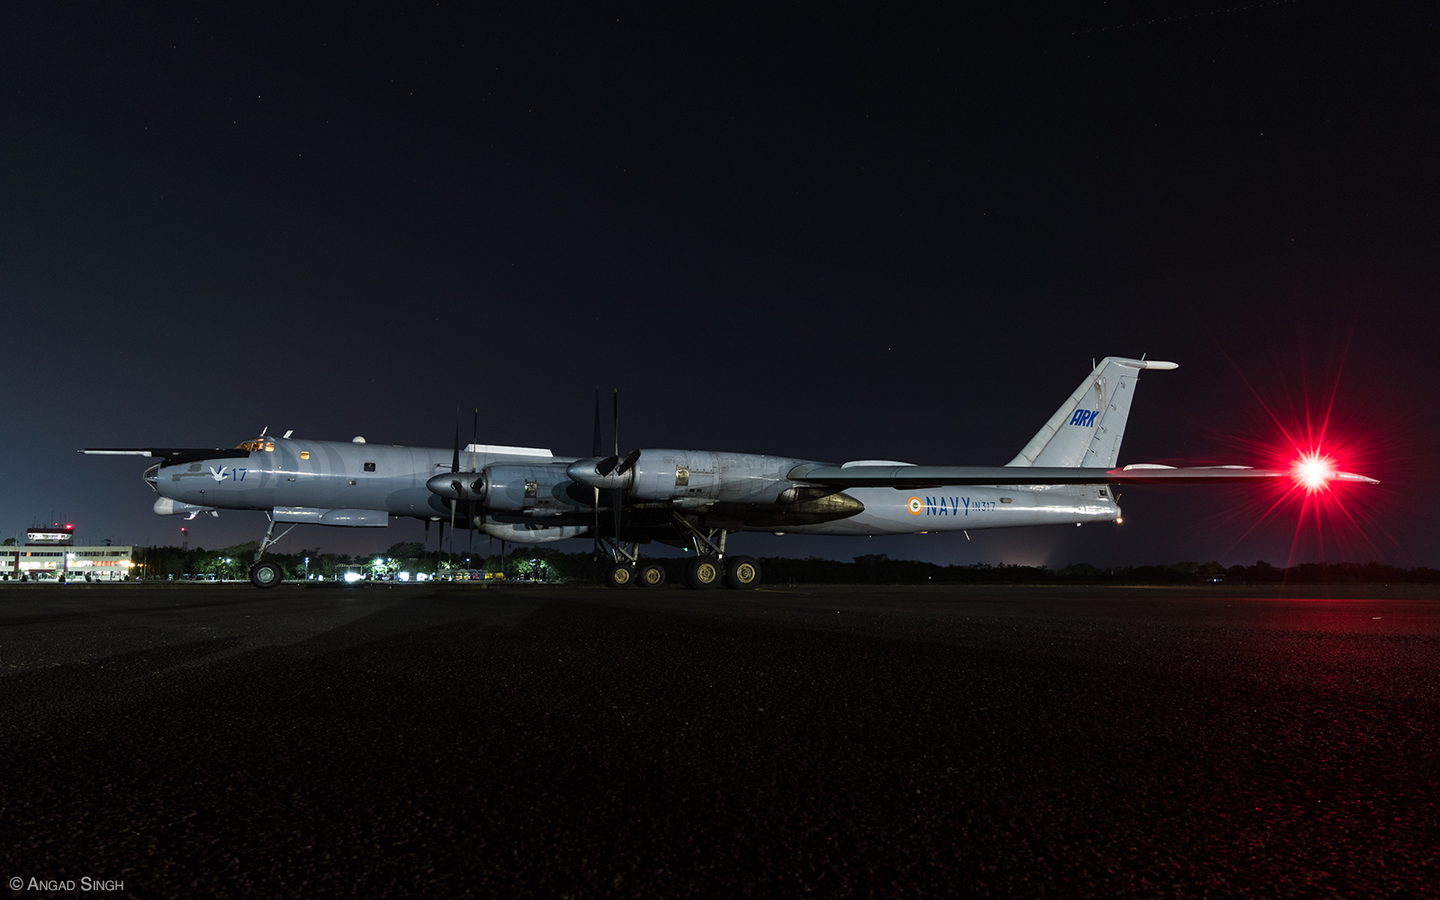 A Bear at rest under the night sky — unlike the Il-38s and P-8Is, the Tu-142s spent the entirety of their 29 years parked in the open. <em>Angad Singh</em>